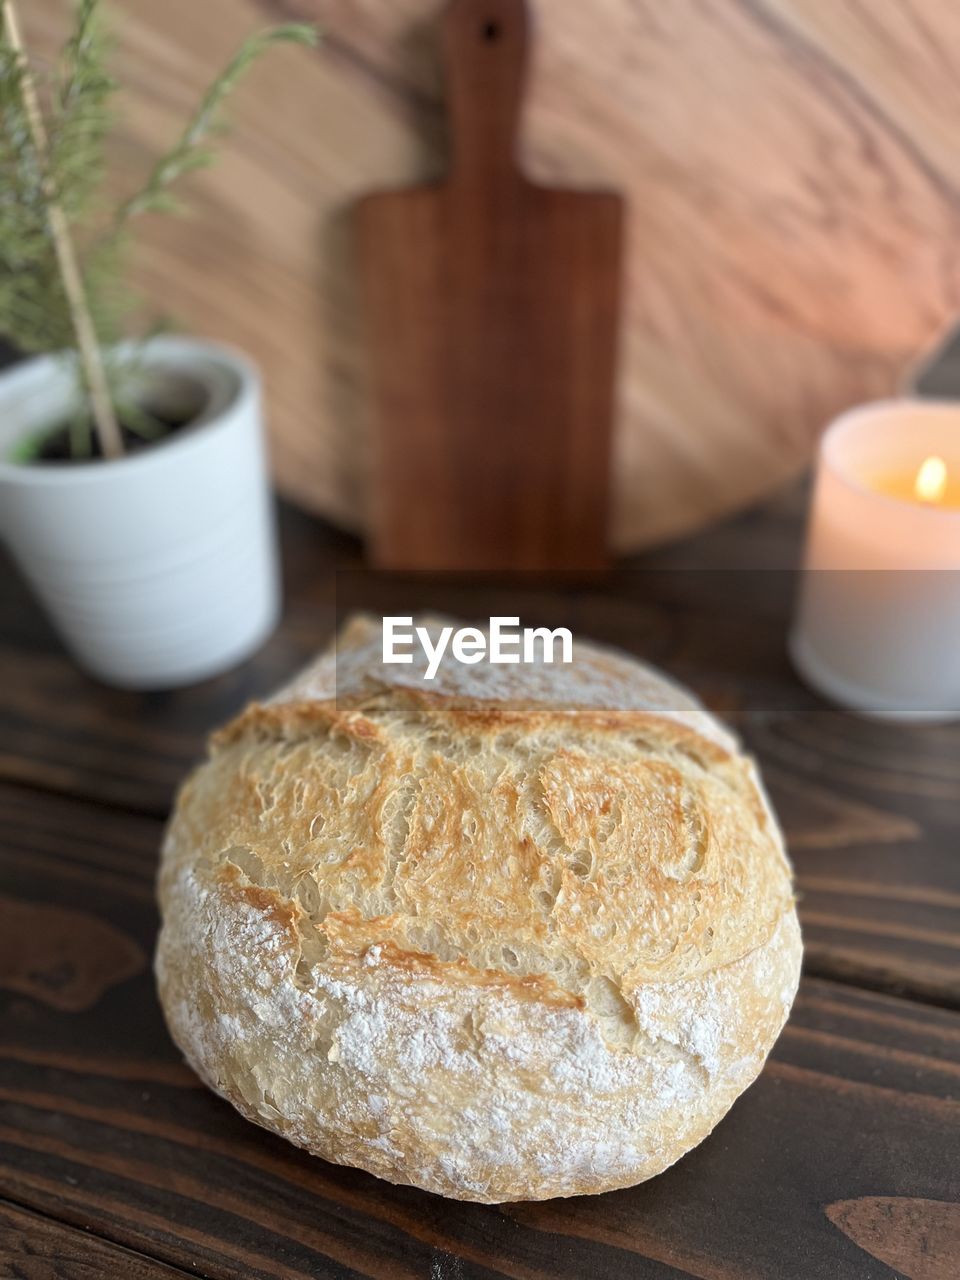 food, food and drink, wellbeing, wood, candle, freshness, healthy eating, plant, bread, indoors, nature, no people, table, baked, close-up, breakfast, soda bread, produce, meal, simplicity, rustic, loaf of bread, tradition